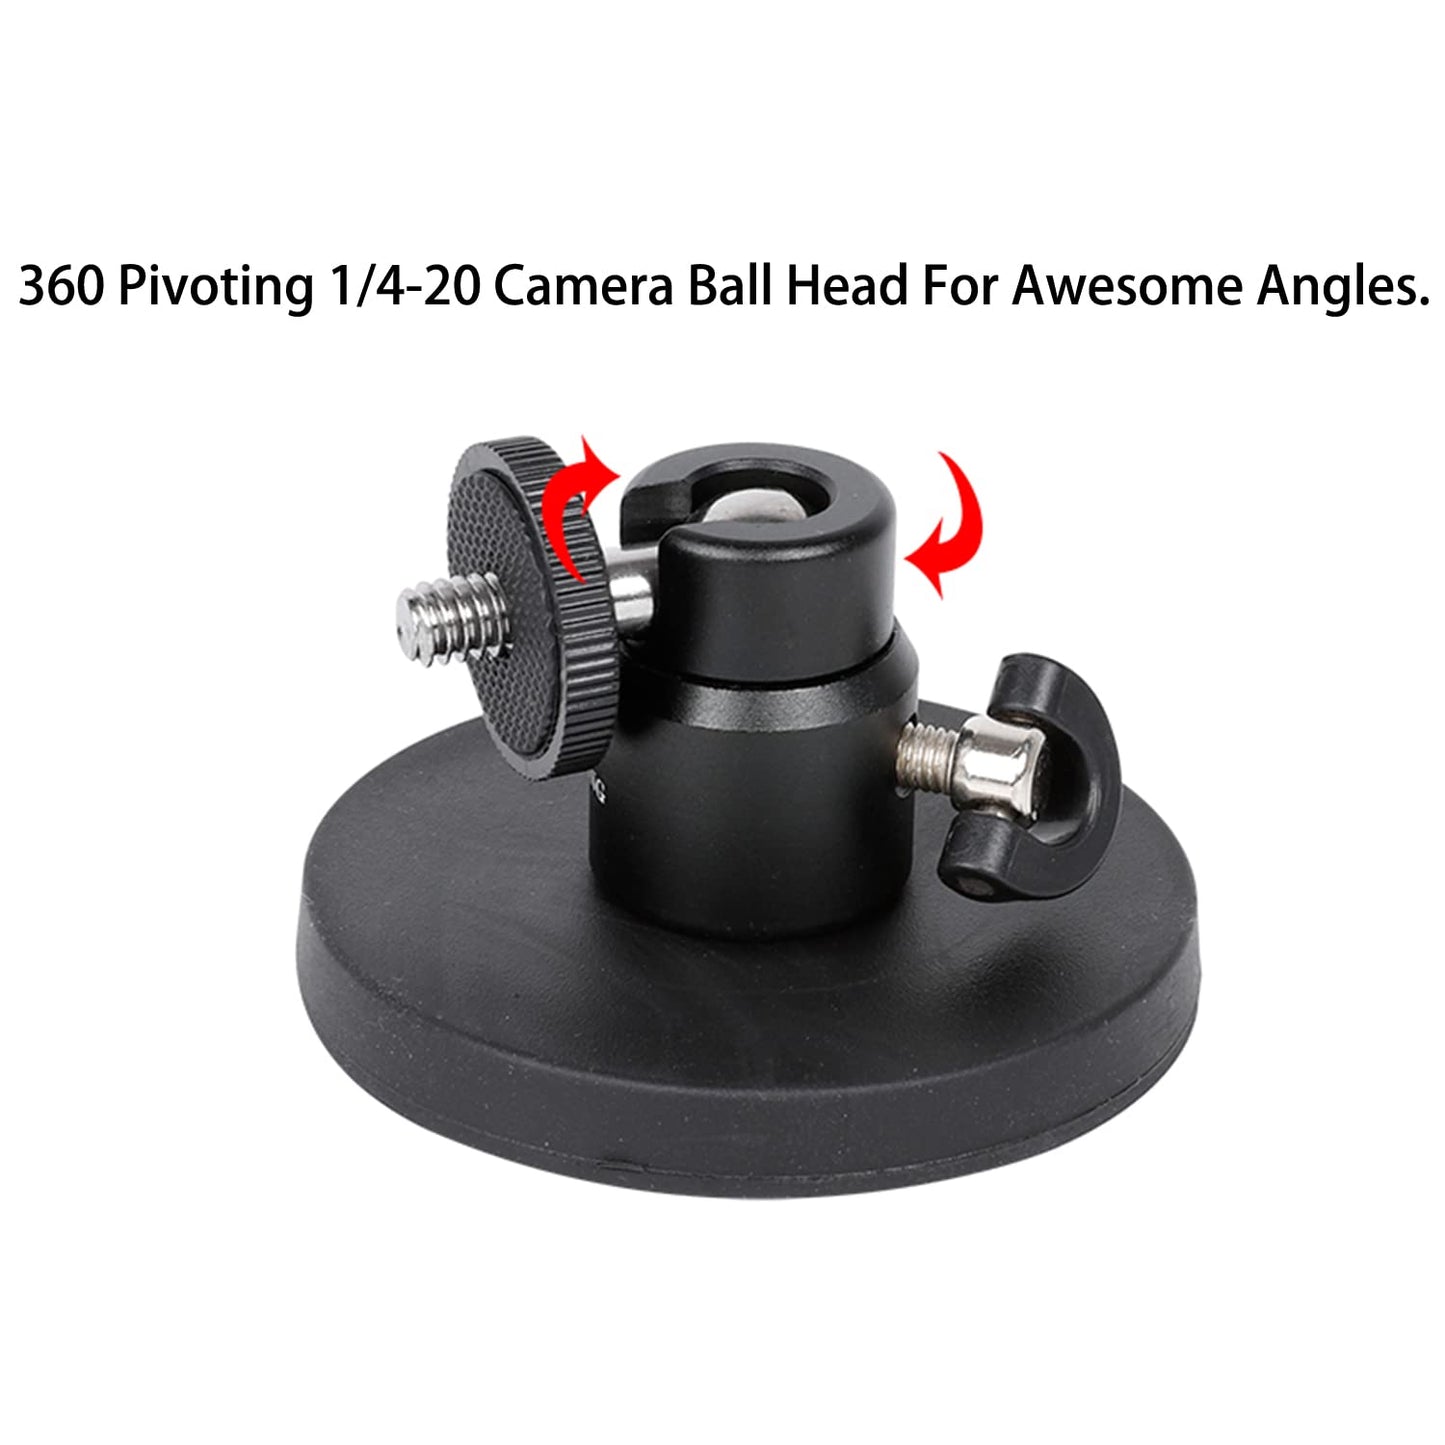 PellKing Magnet Camera Mount for GoPro Insta360 Akaso DJI Action,with Rotation Ball Head Super Strong Rubber Coating Neodymium Magnet for Car, Attaches to Steel or Other Magnetic Surfaces